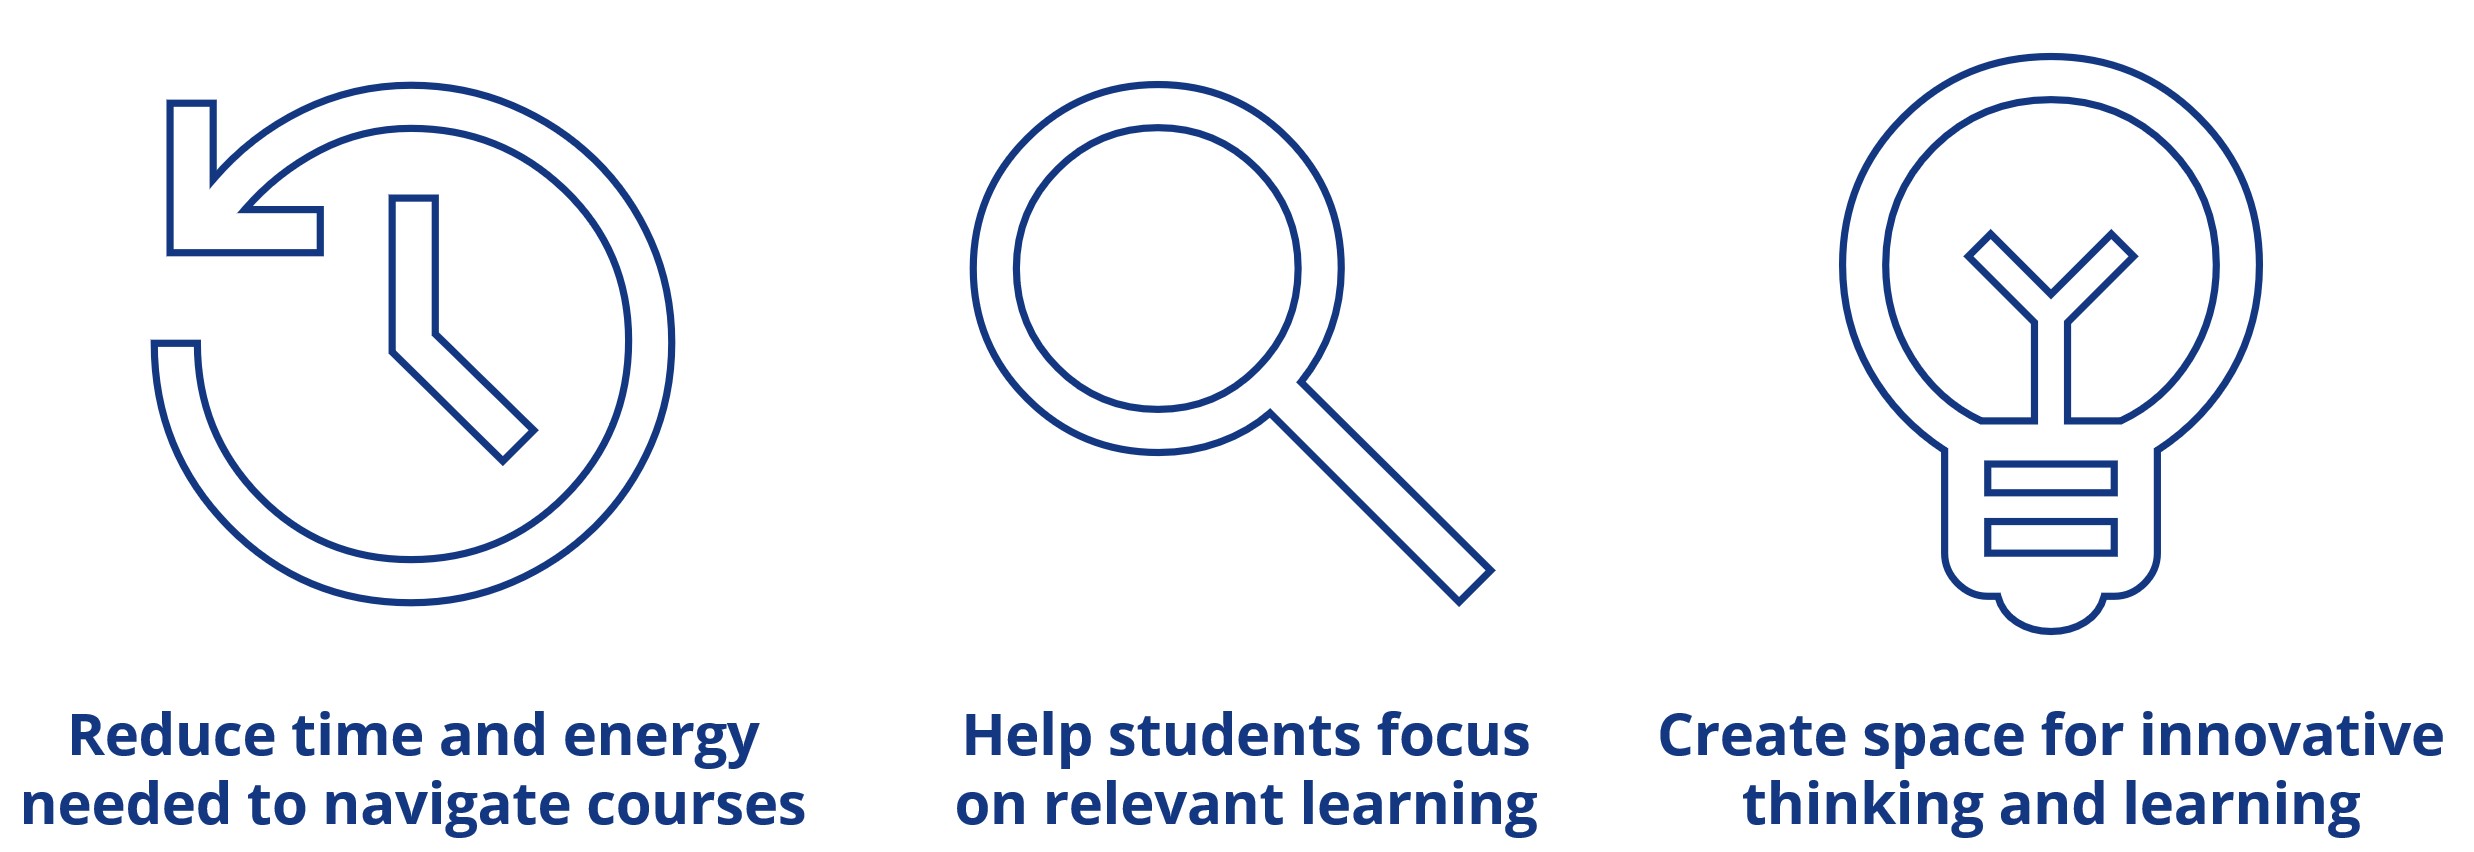 Design priorities to reduce cognitive load: reduce time and energy needed to navigate courses; help students focus on relevant learning; create space for innovative thinking and learning.